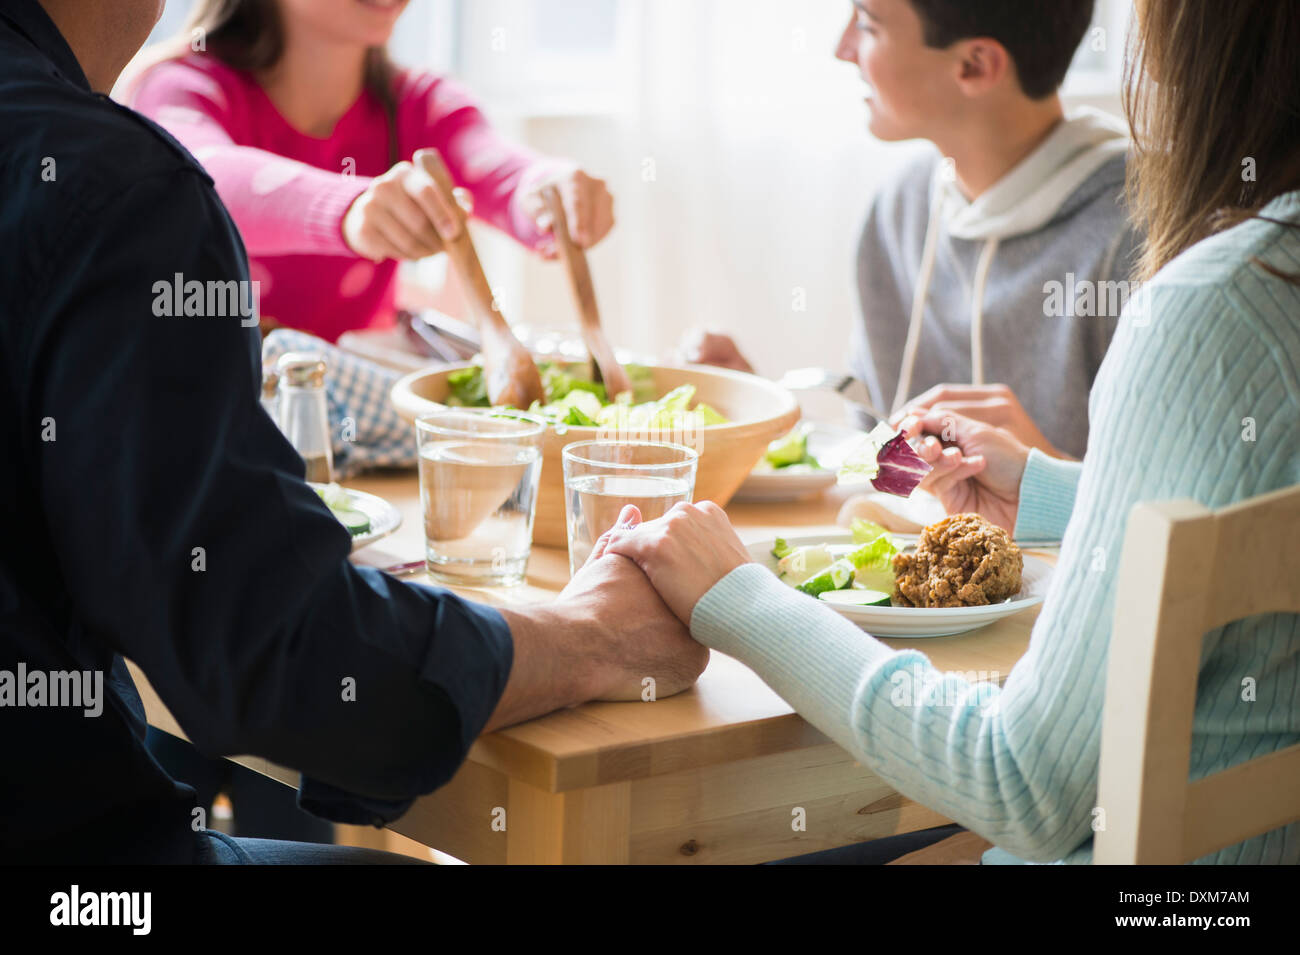 Caucasian parents holding hands at table Stock Photo